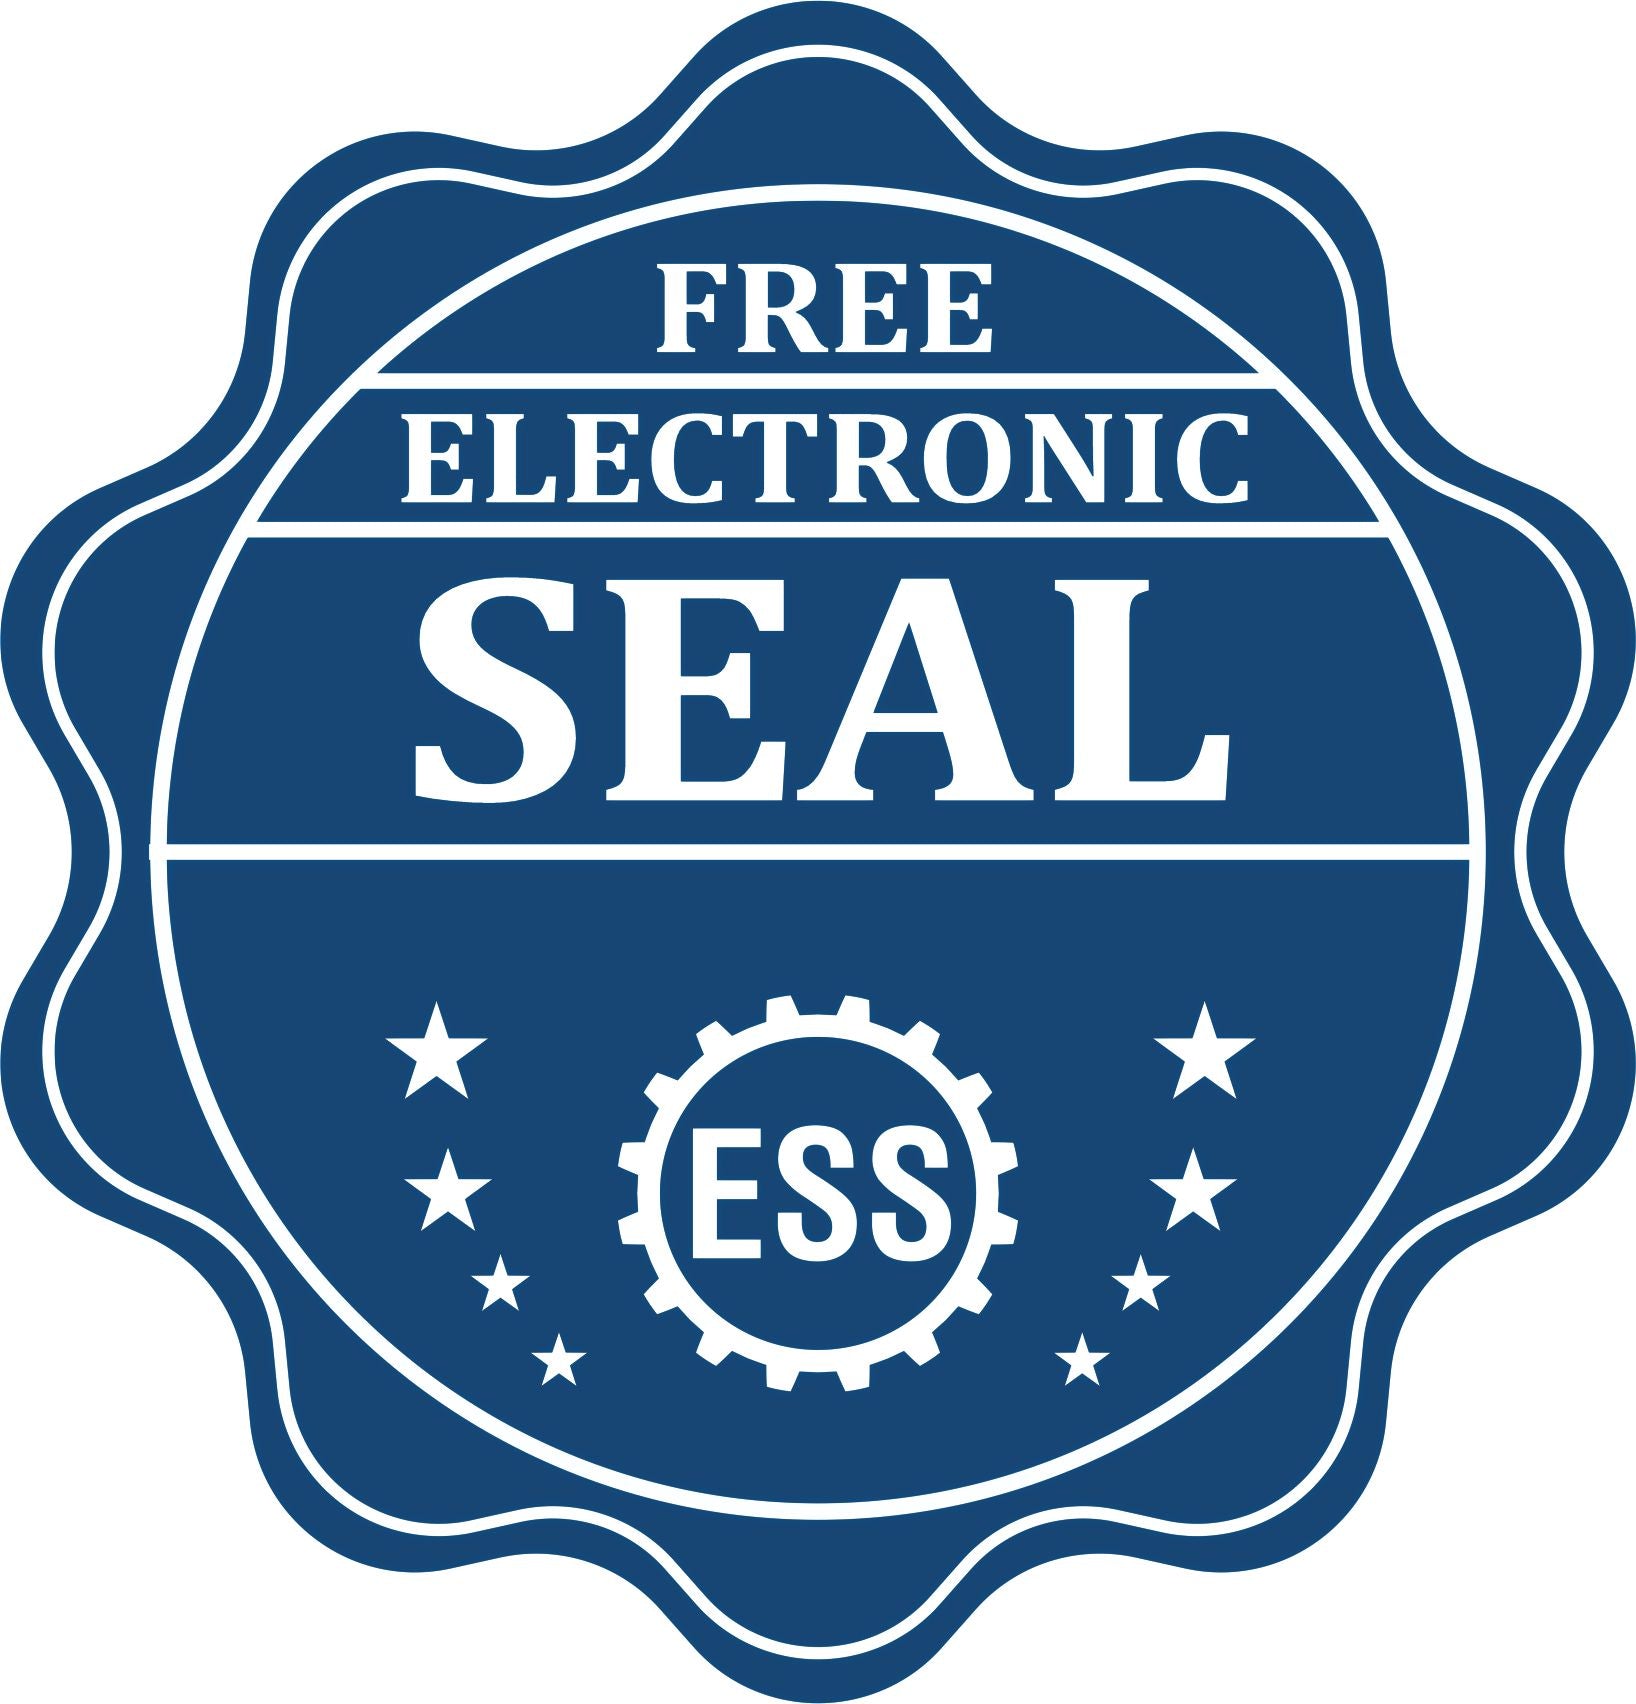 A badge showing a free electronic seal for the Extended Long Reach Tennessee Surveyor Embosser with stars and the ESS gear on the emblem.